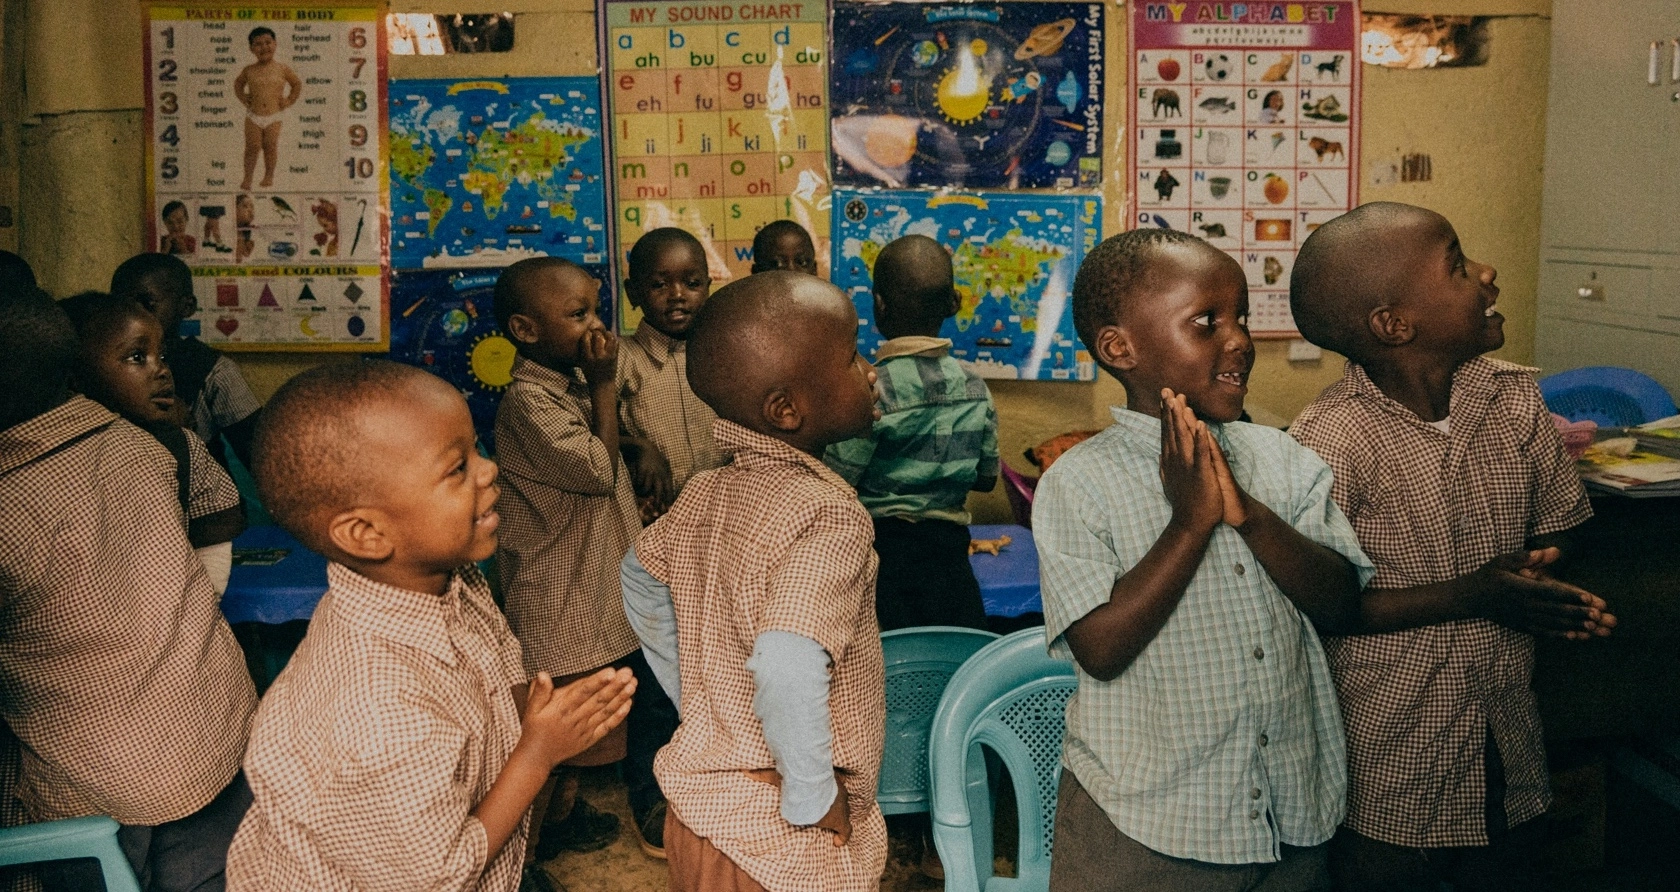 Children are playing inside a classroom of Tabor School. They have educational posters about the human structure, the alphabet, the solar system, and others.